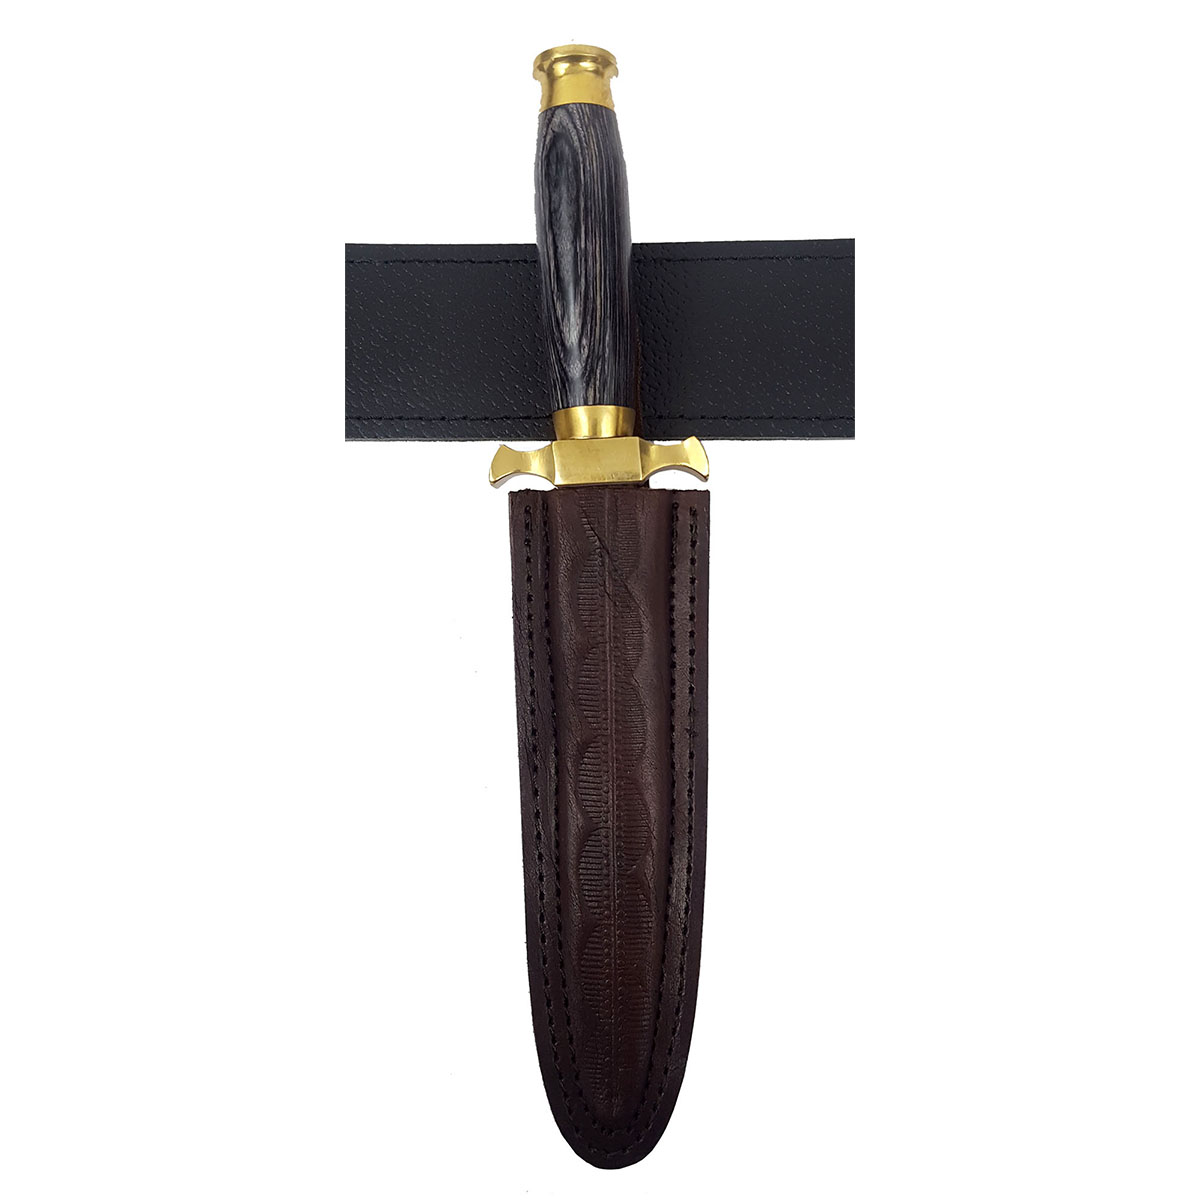 10-inch Renaissance Dagger With Steel Blade and Leather Sheath